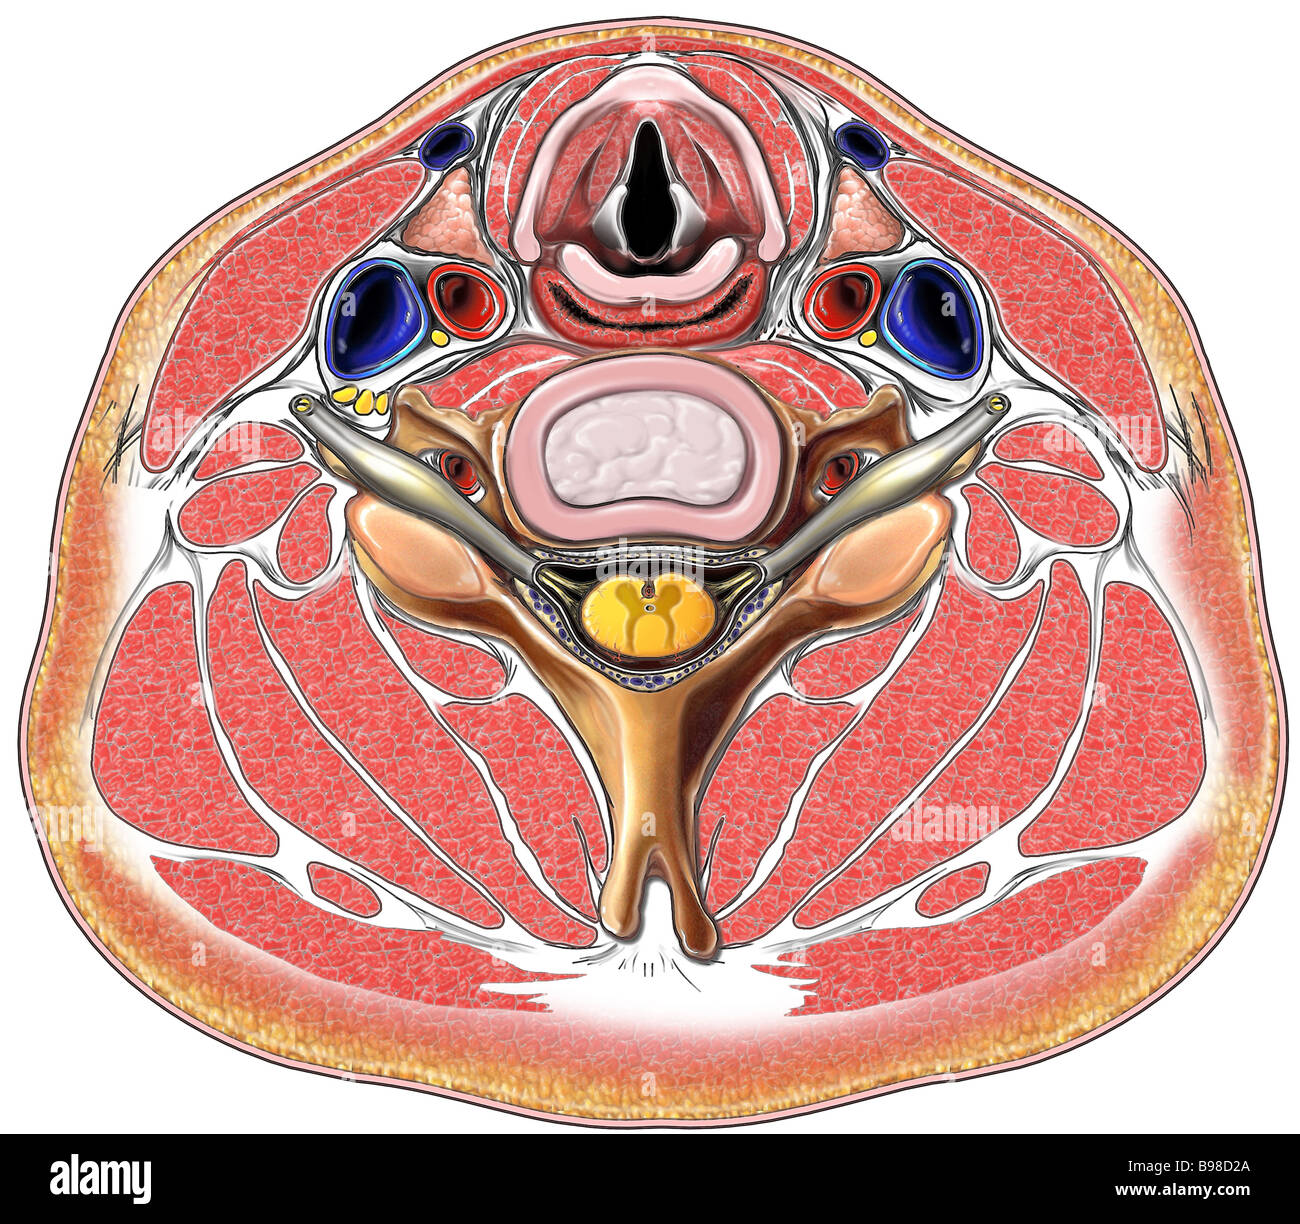 This medical image features a cross section of the neck including the